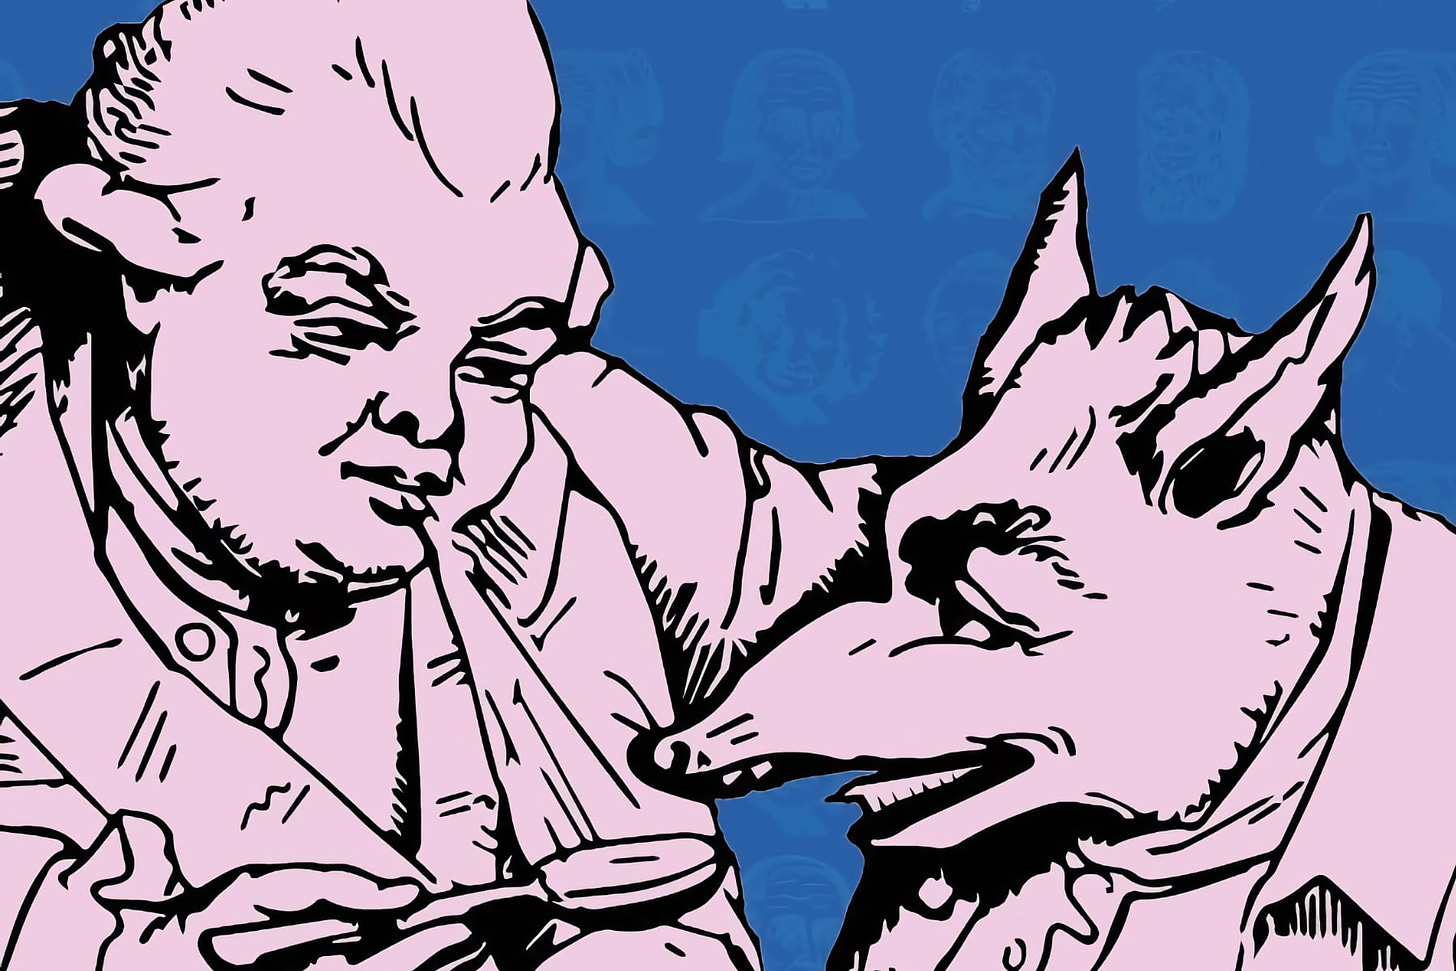 A vibrant graphic for the "Striking Impressions" exhibition, featuring a stylised illustration of a human figure and a wolf-like character engaging closely. The human figure appears contemplative, holding a spoon and leaning towards the wolf, which is portrayed mid-snort or speech. The background is a bold blue with ghosted faces, emphasising the exhibition's theme of exploring diverse representations of faces. The art style is bold and graphic, using pink outlines on a vivid blue backdrop to create a striking visual contrast.